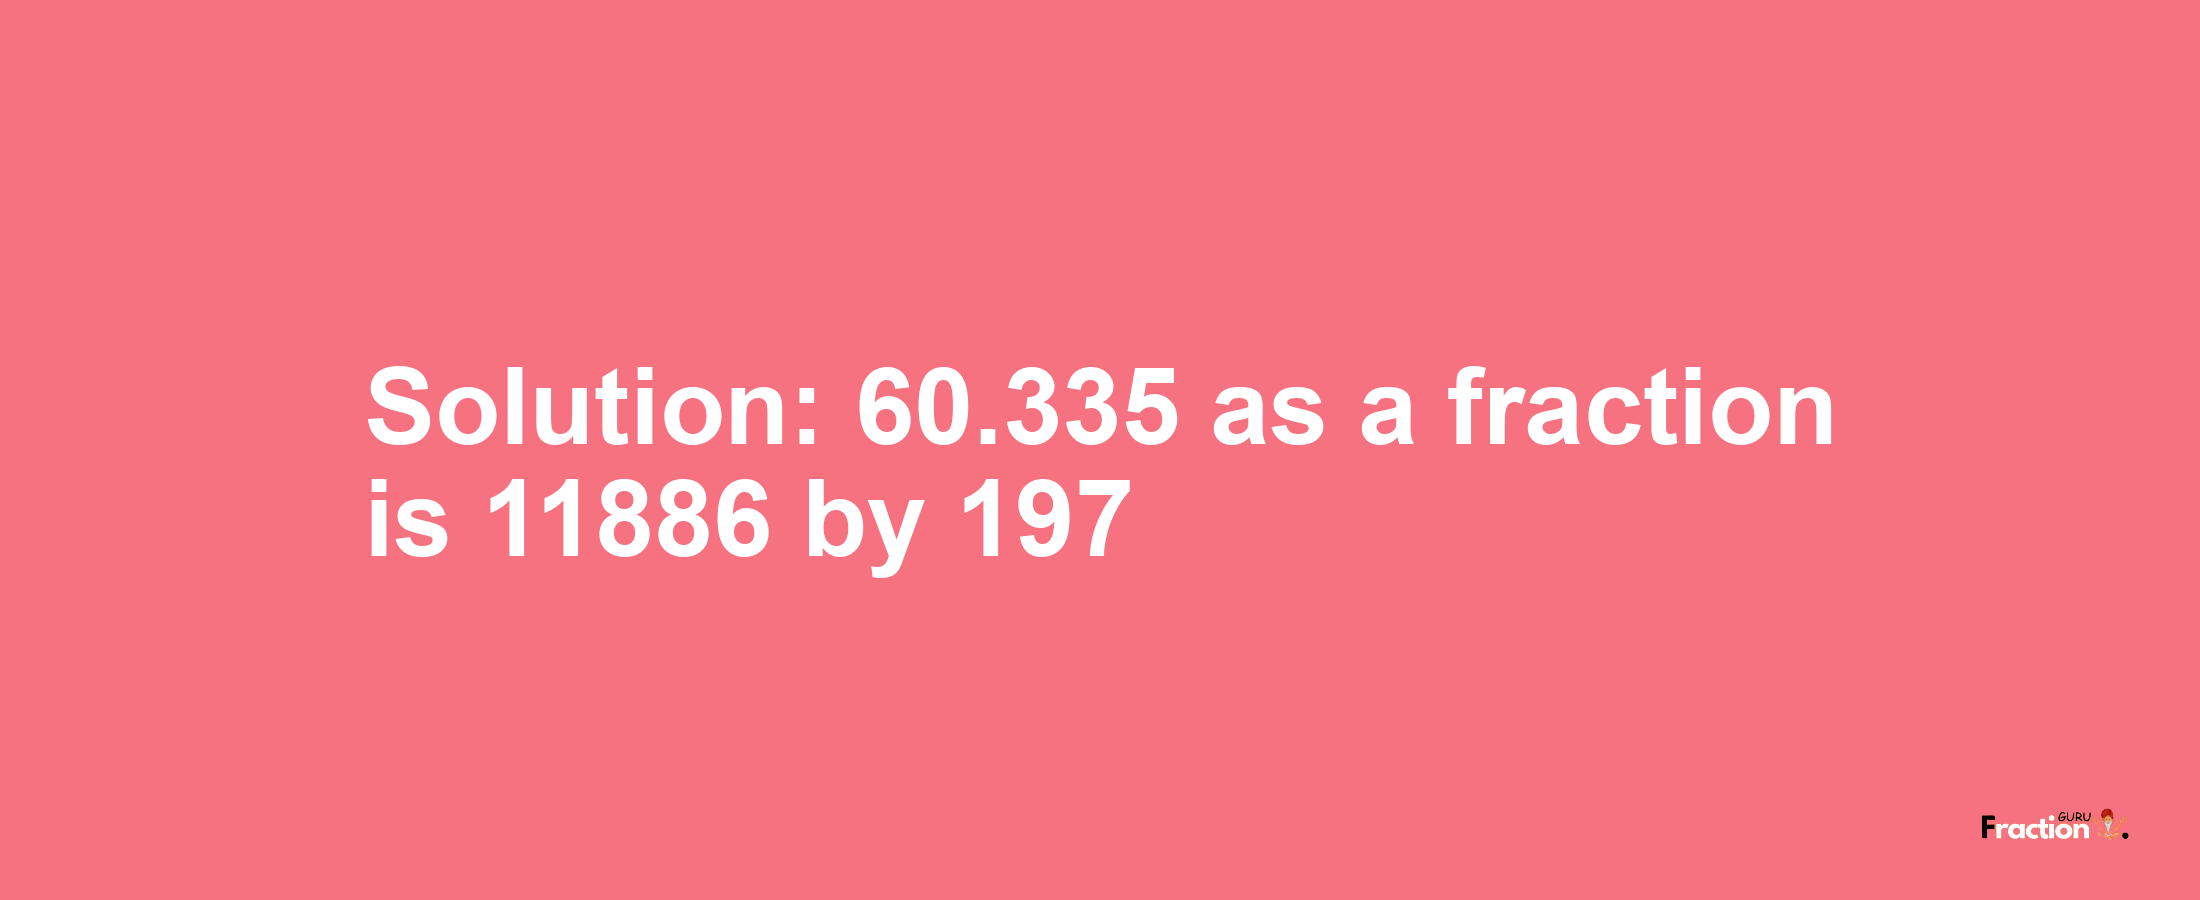 Solution:60.335 as a fraction is 11886/197